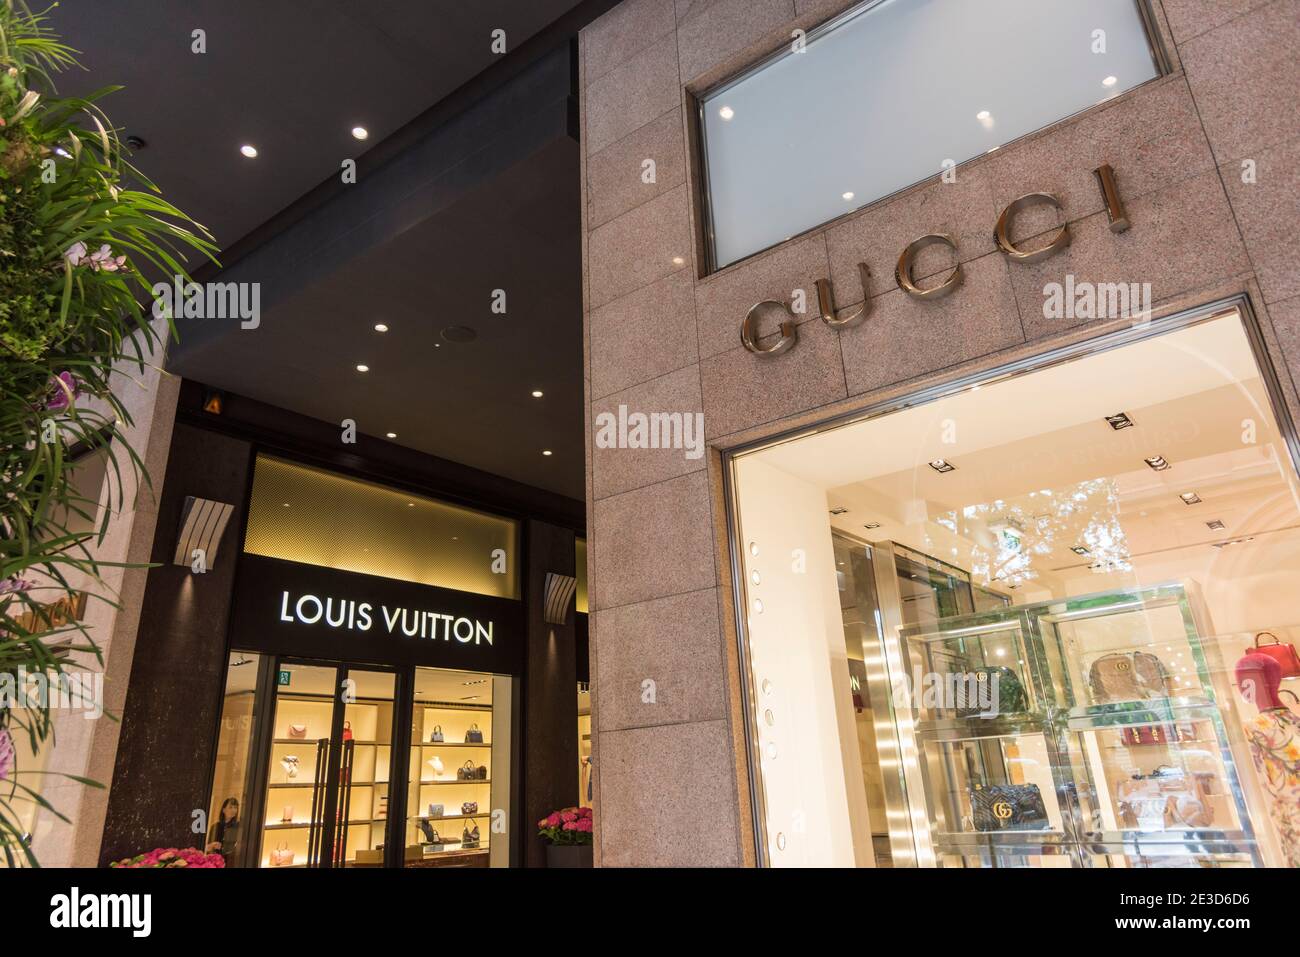 The Gucci designer shop in the shopping mall Galleria Cavour Bologna Italy  Stock Photo - Alamy